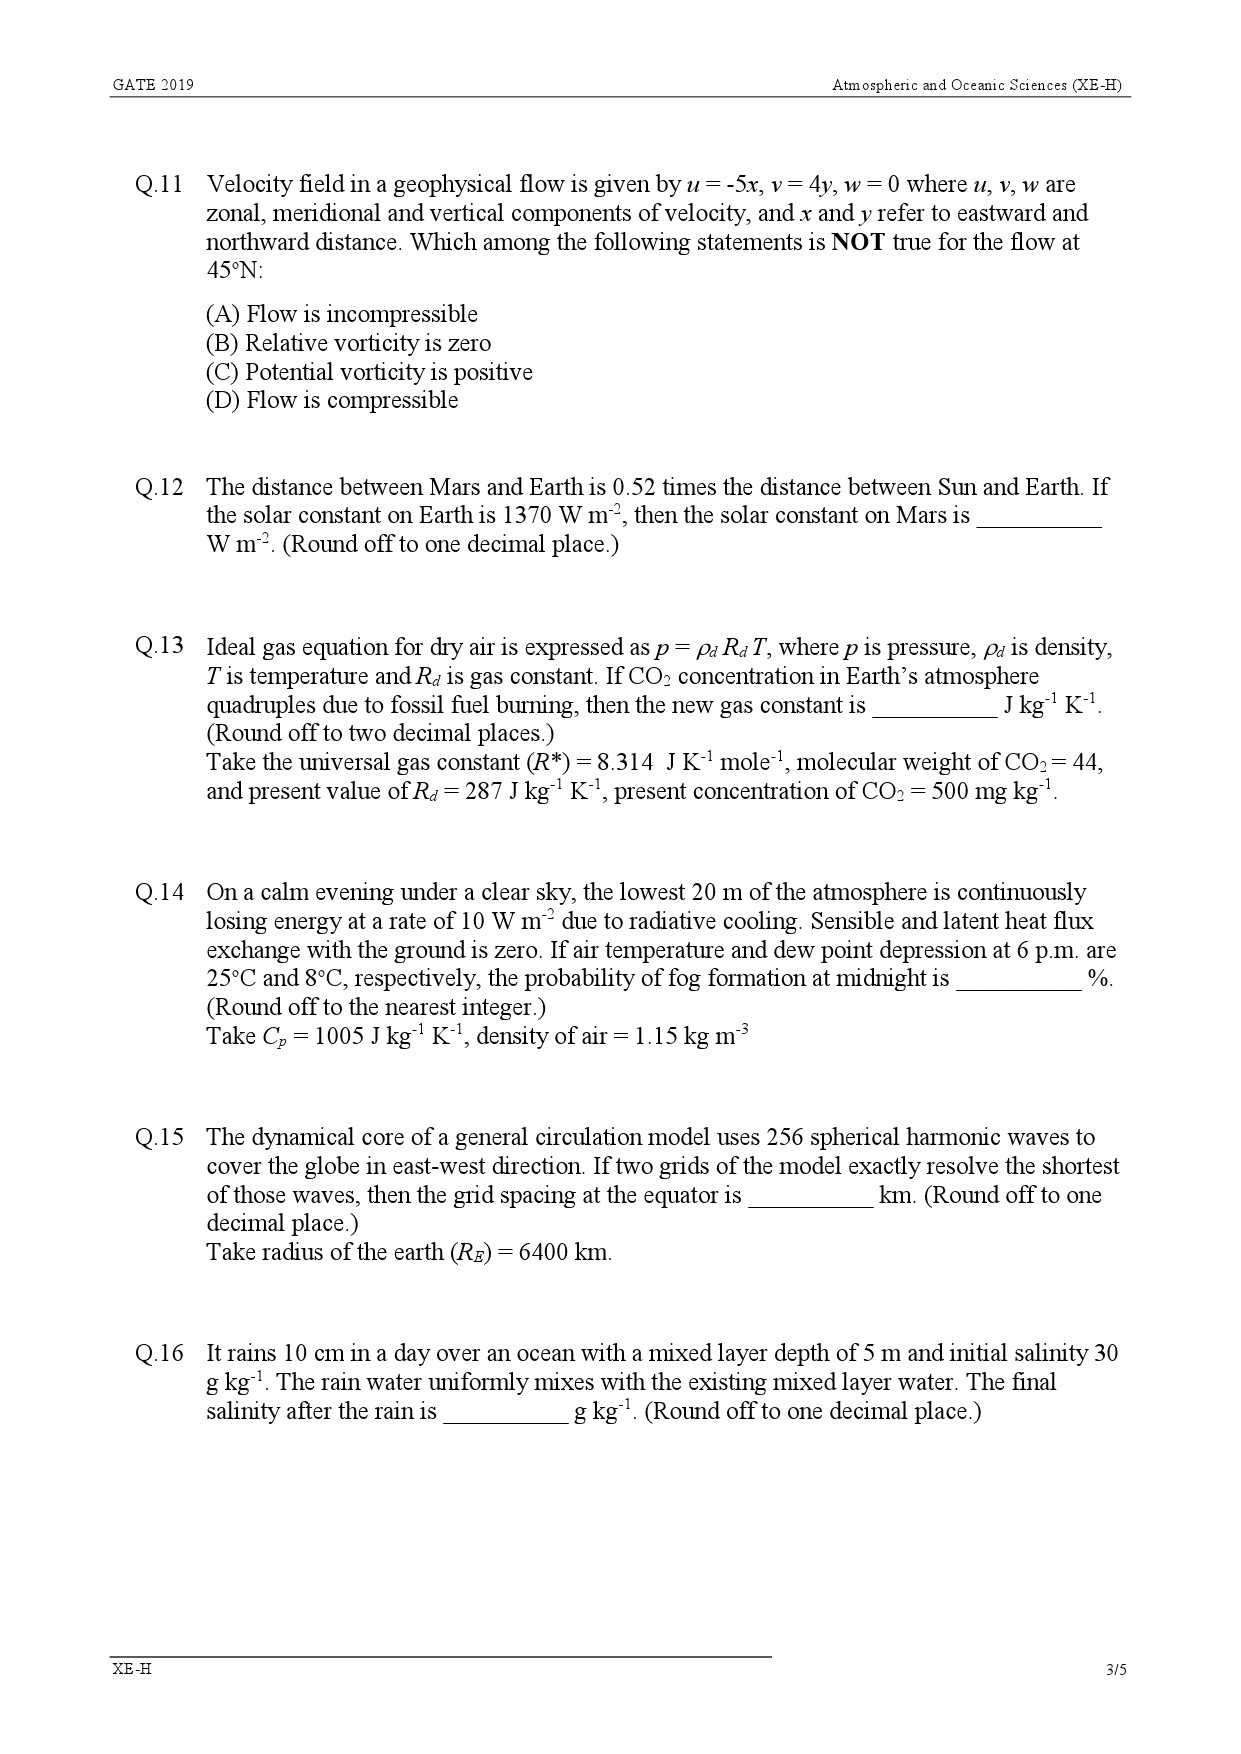 GATE Exam Question Paper 2019 Engineering Sciences 38